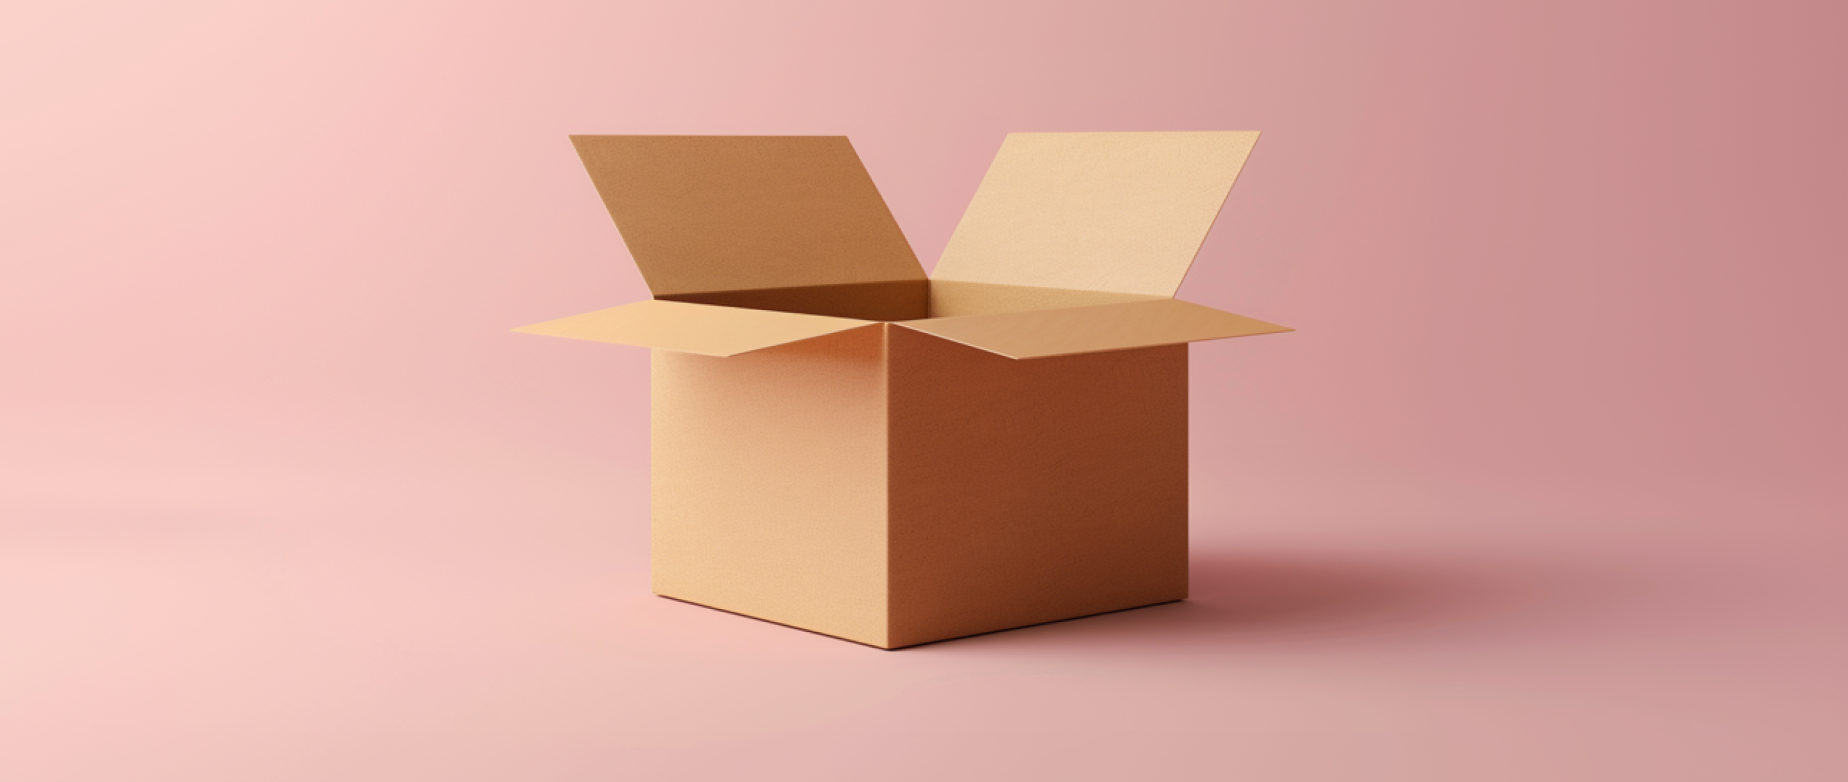 An open cardboard box on a pink background.